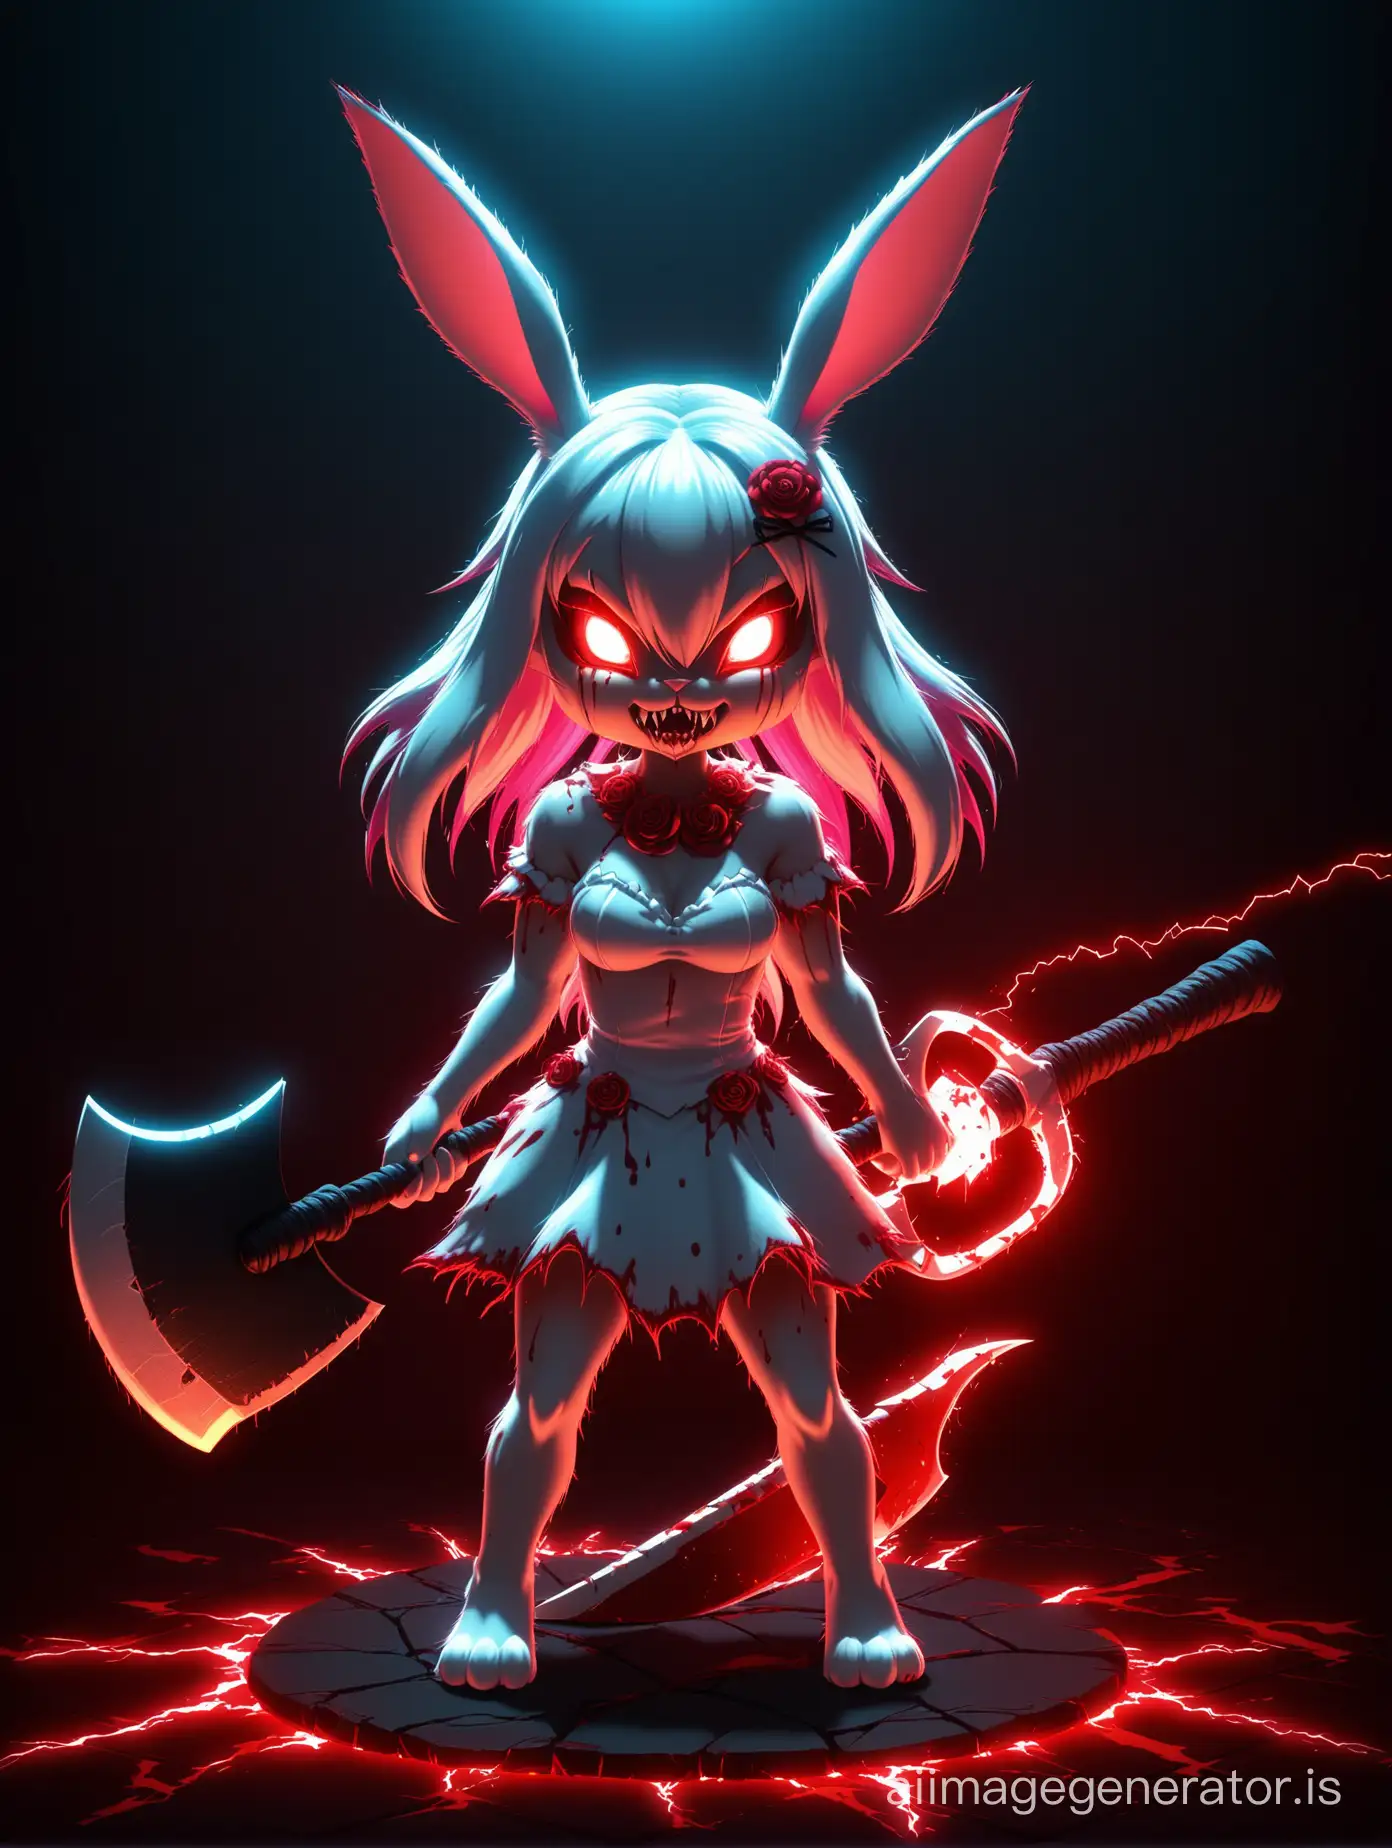 Rabid demonic rabbit girl, in costume, with big ears, dark colors, axe in paw, tail, bloody flower hairpin, glowing white eyes, 3D, rendering, HD, proportionality, vector, fantasy, anime. Glowing dark background, bright flashes, lightning.